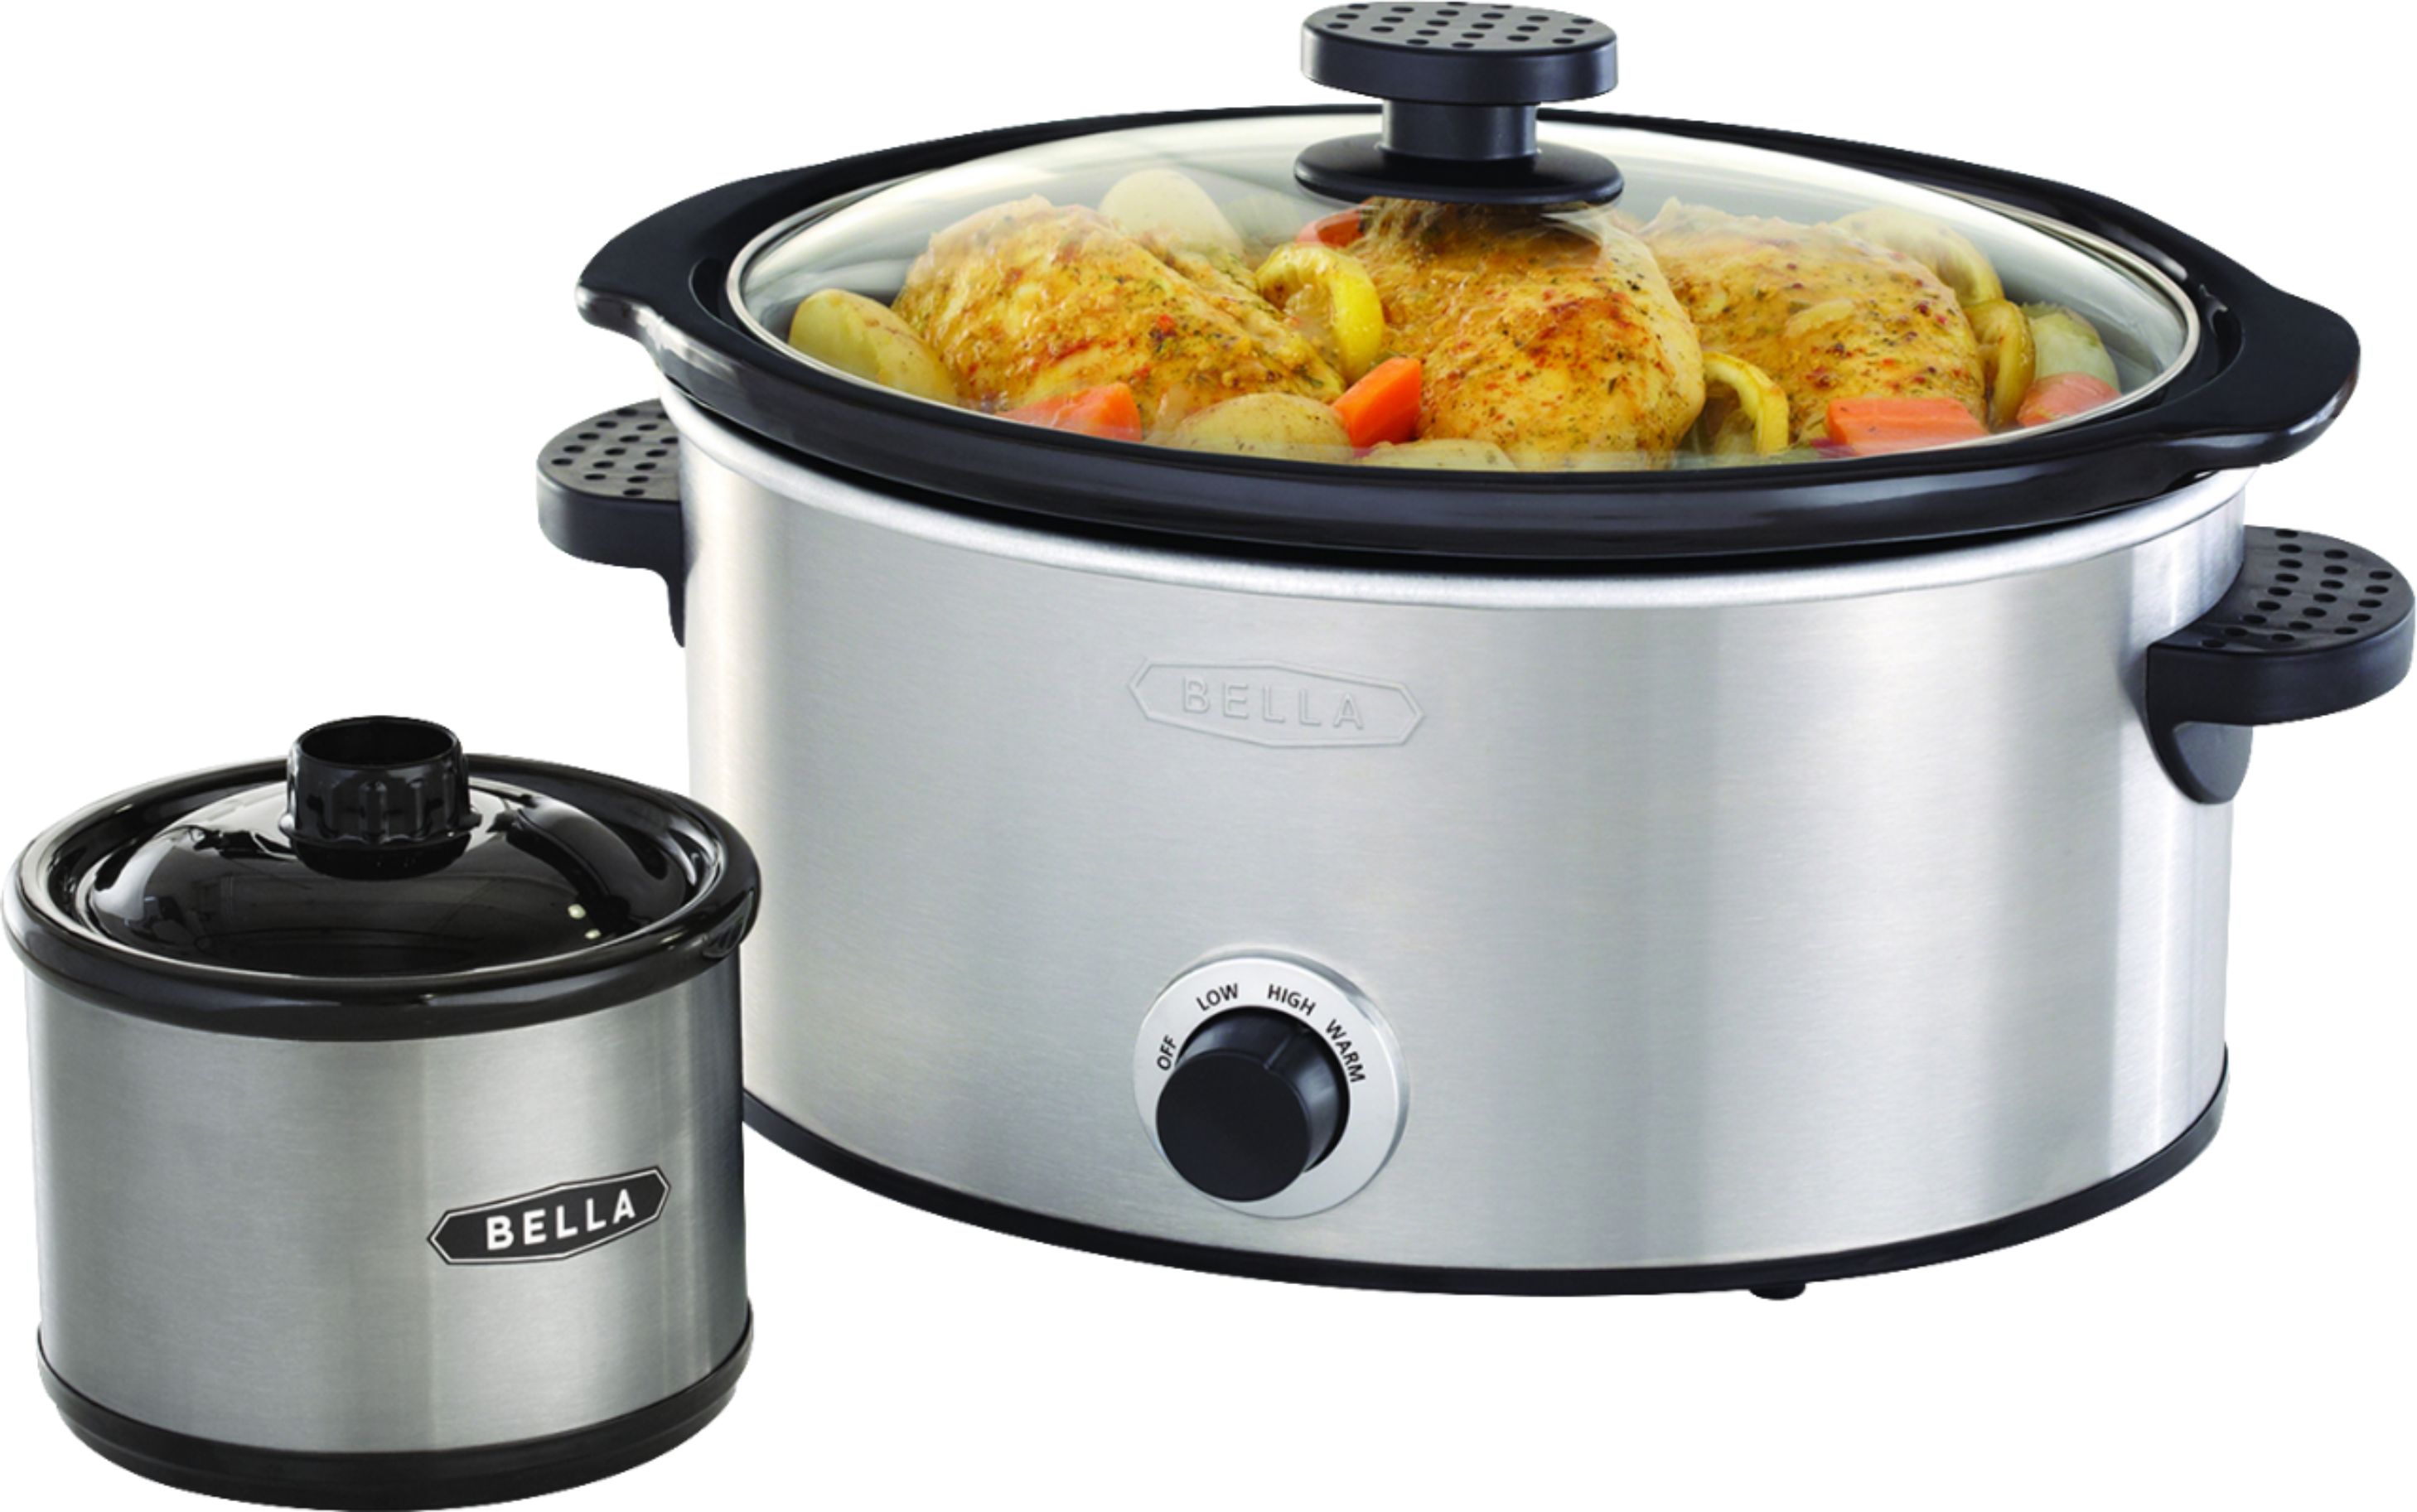 SEE NOTES WESTON BRANDS 2 In 1 Indoor Electric Smoker Slow Cooker 6 Quart